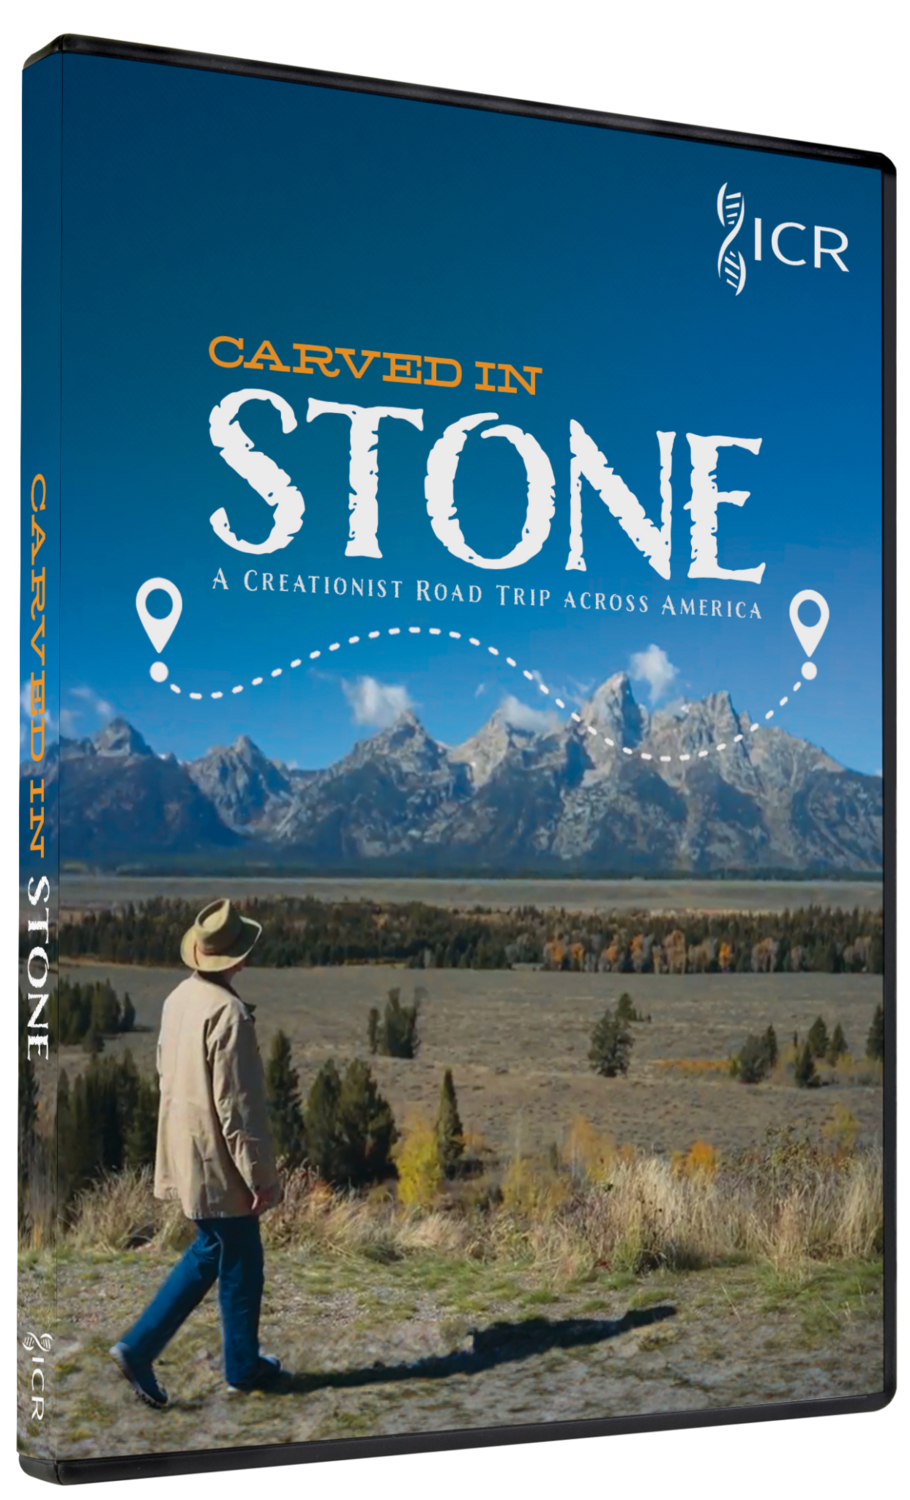 Carved in Stone DVD